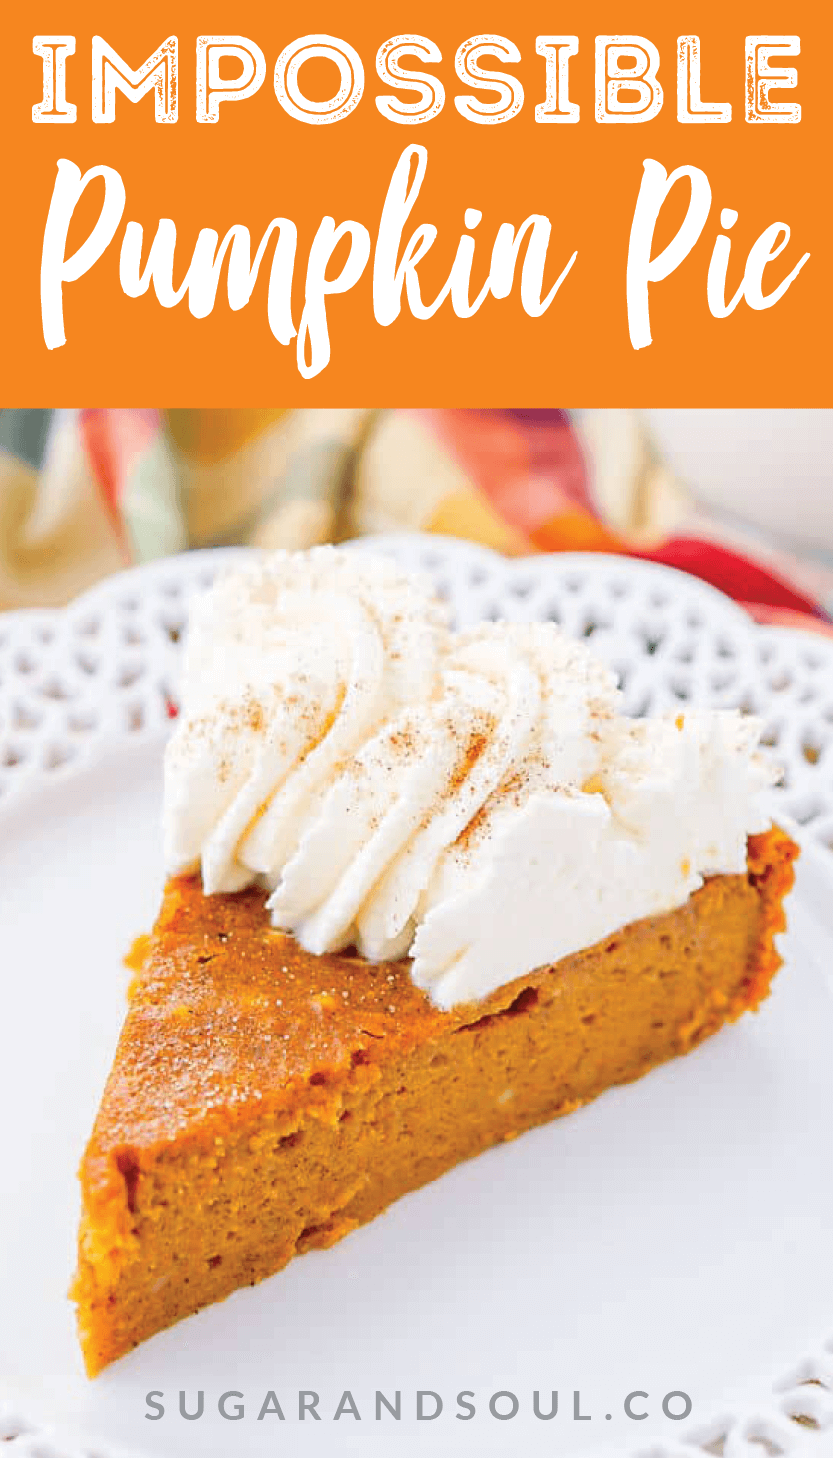 This Impossible Pumpkin Pie Recipe is actually the easiest pumpkin pie you'll ever make! As it bakes, it forms a light crust on its own and leaves behind a dense, but creamy pumpkin filling. Top it with whipped cream and it's the perfect fall dessert! via @sugarandsoulco